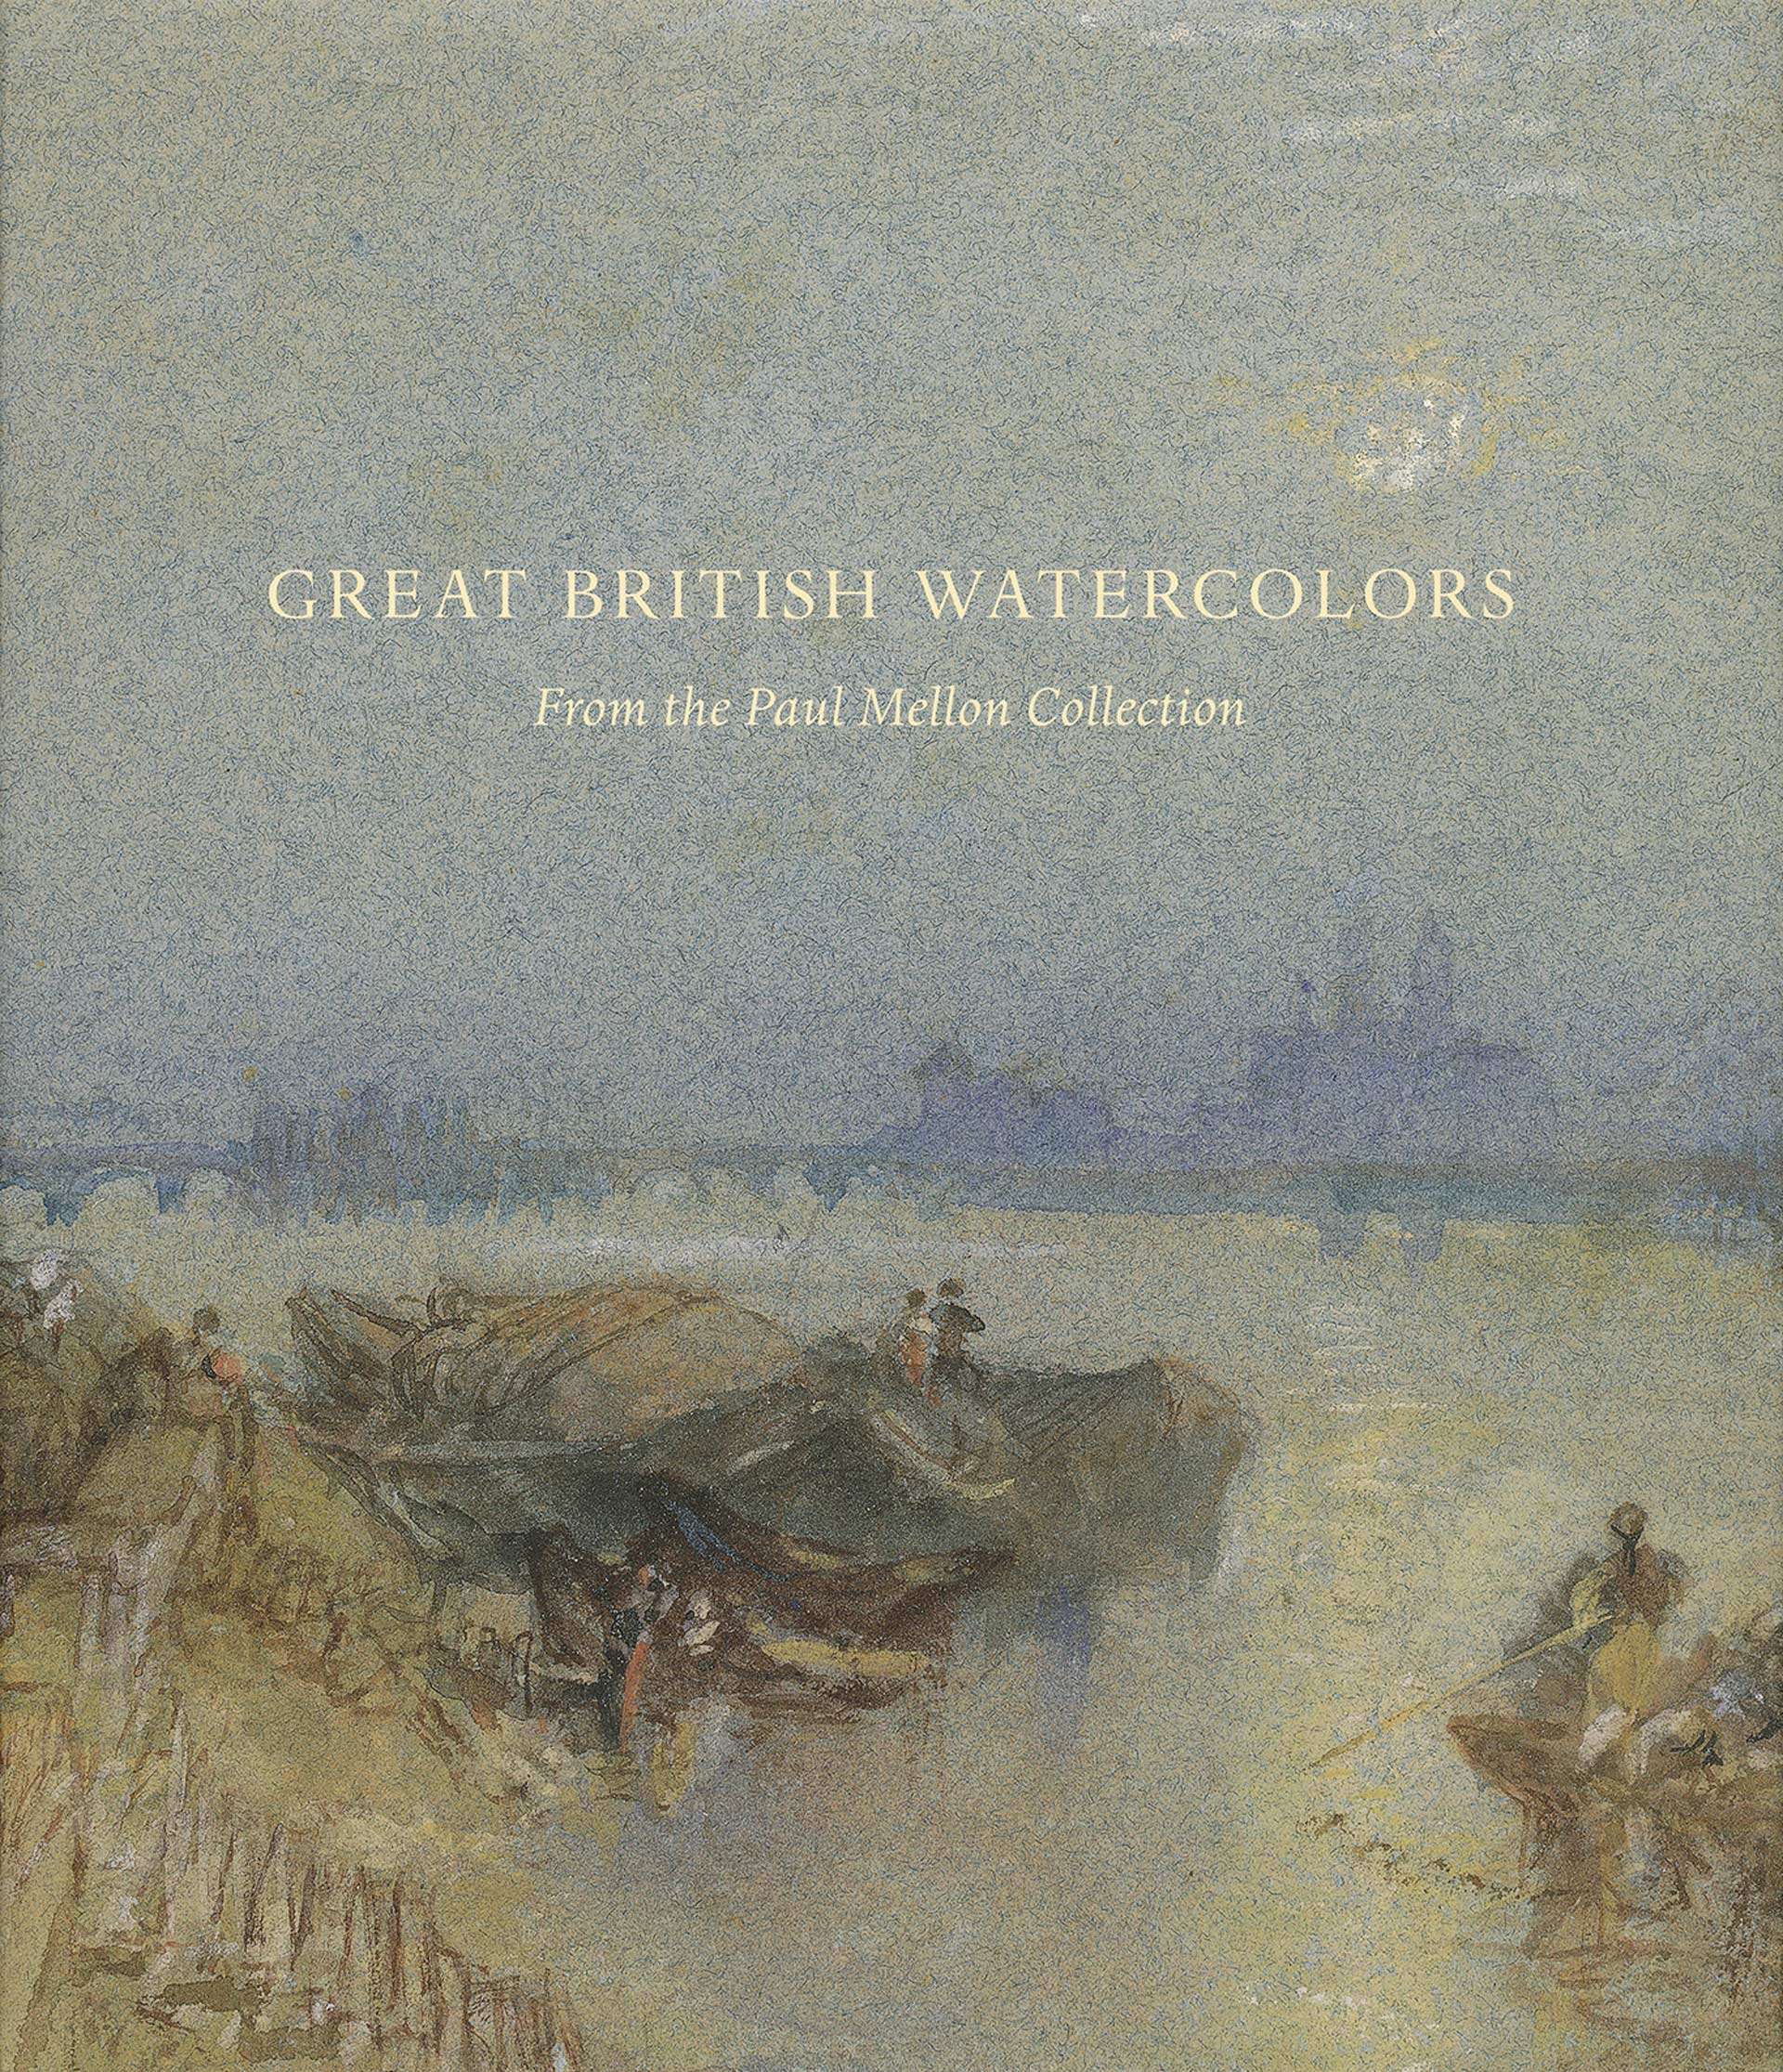 Cover, Great British Watercolors From the Paul Mellon Collection at the Yale Center for British Art